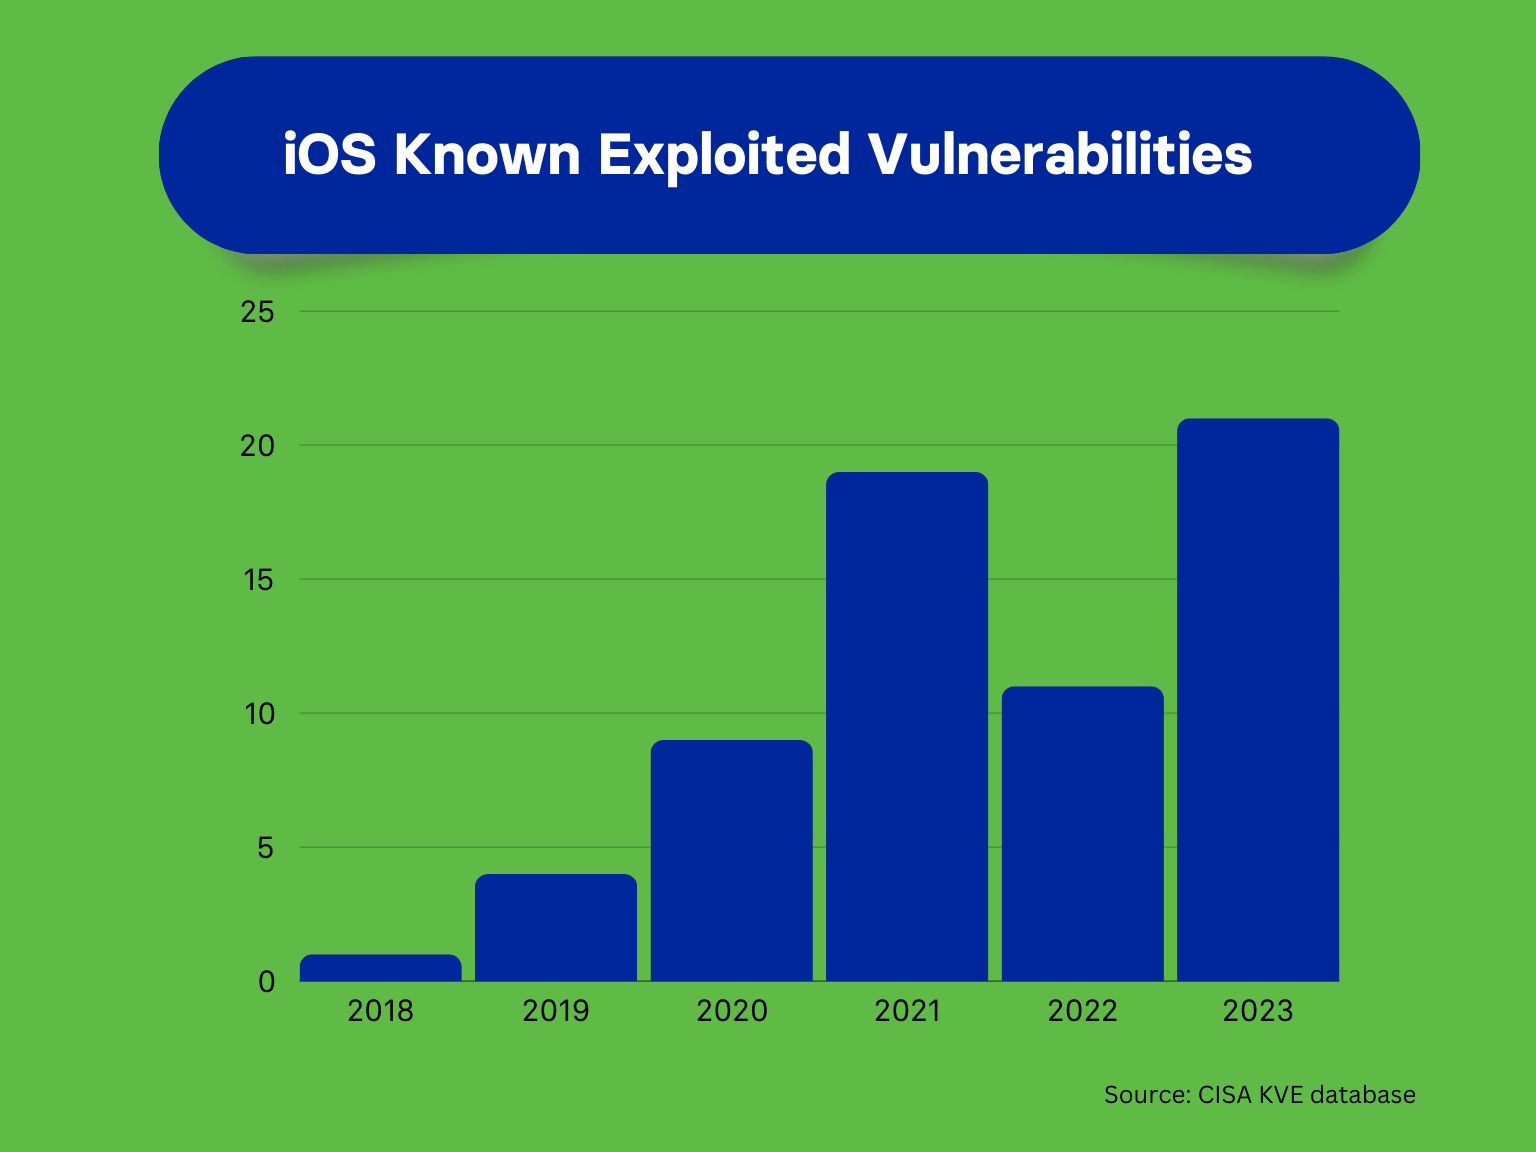 Trend in Known Exploited Vulnerabilities for iOS